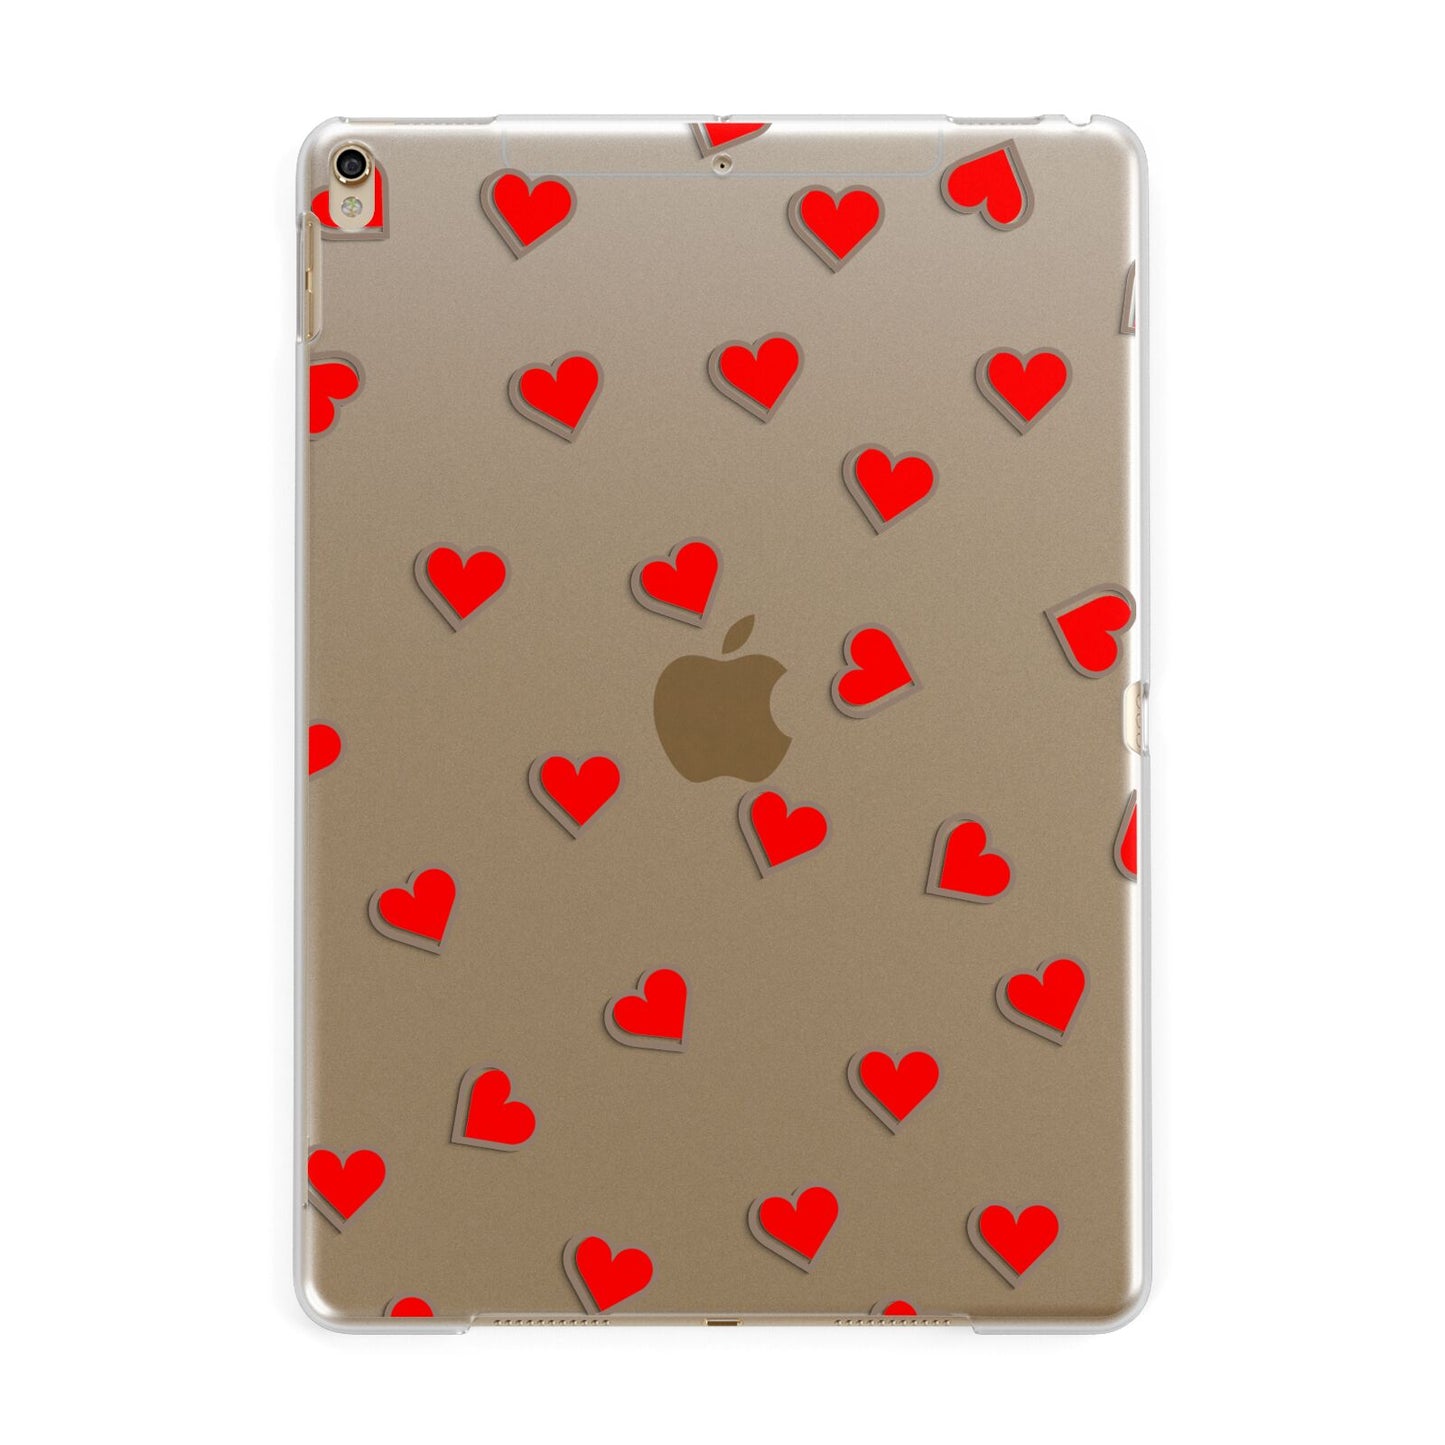 Cute Red Hearts Apple iPad Gold Case